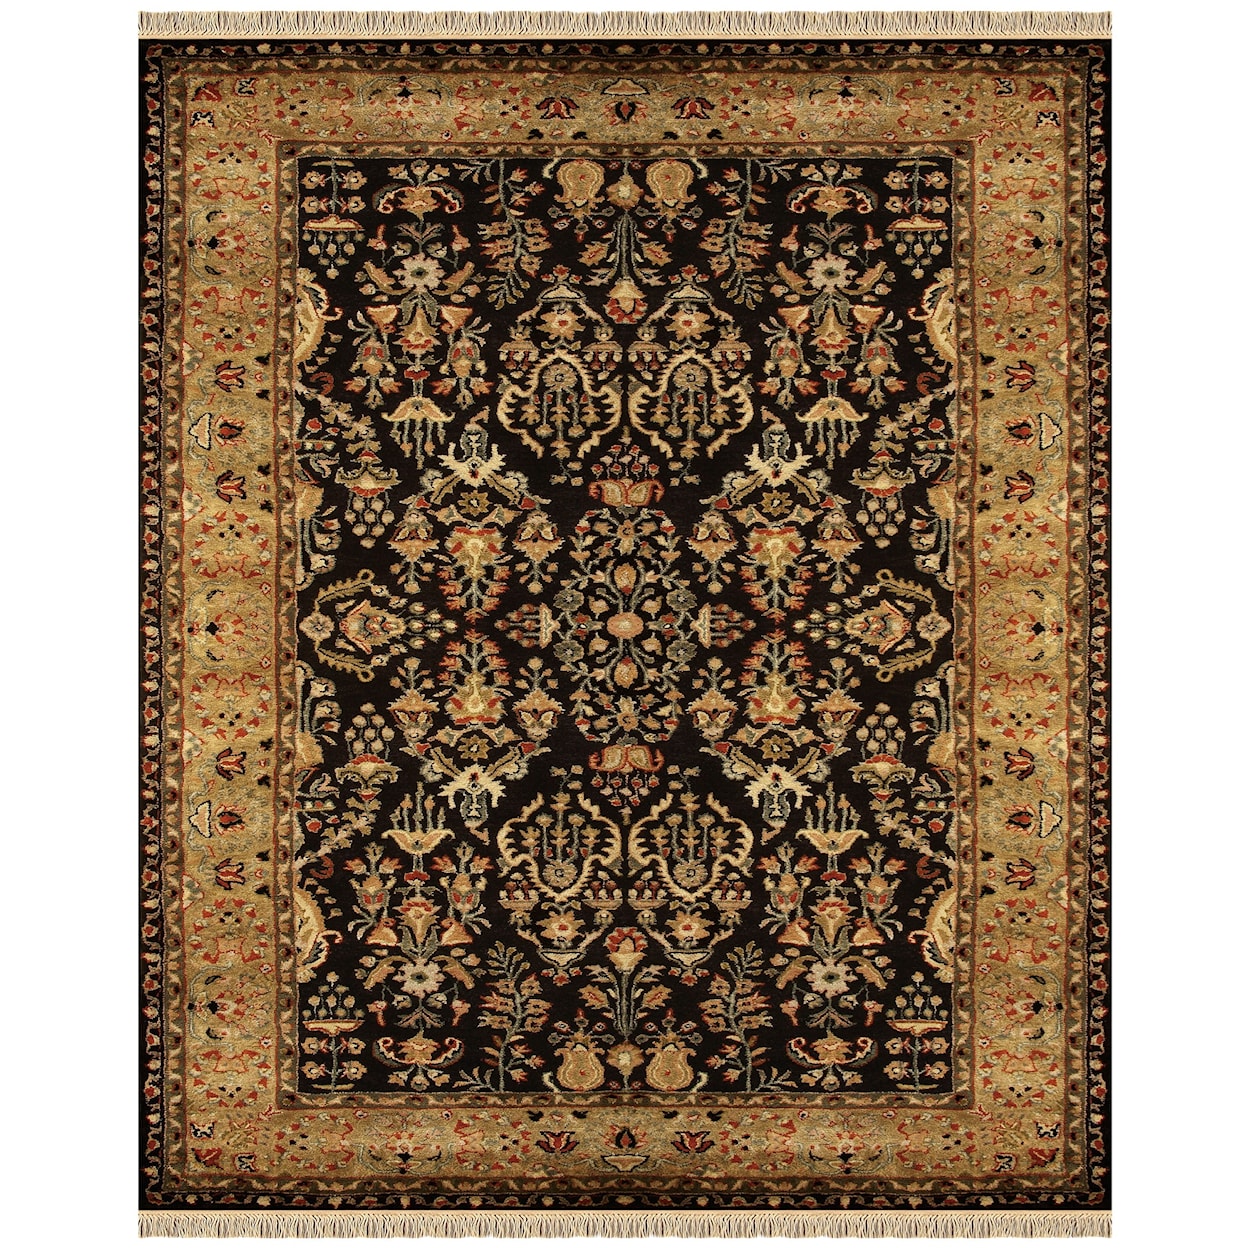 Feizy Rugs Amore Black/Gold 8' x 8' Round Area Rug